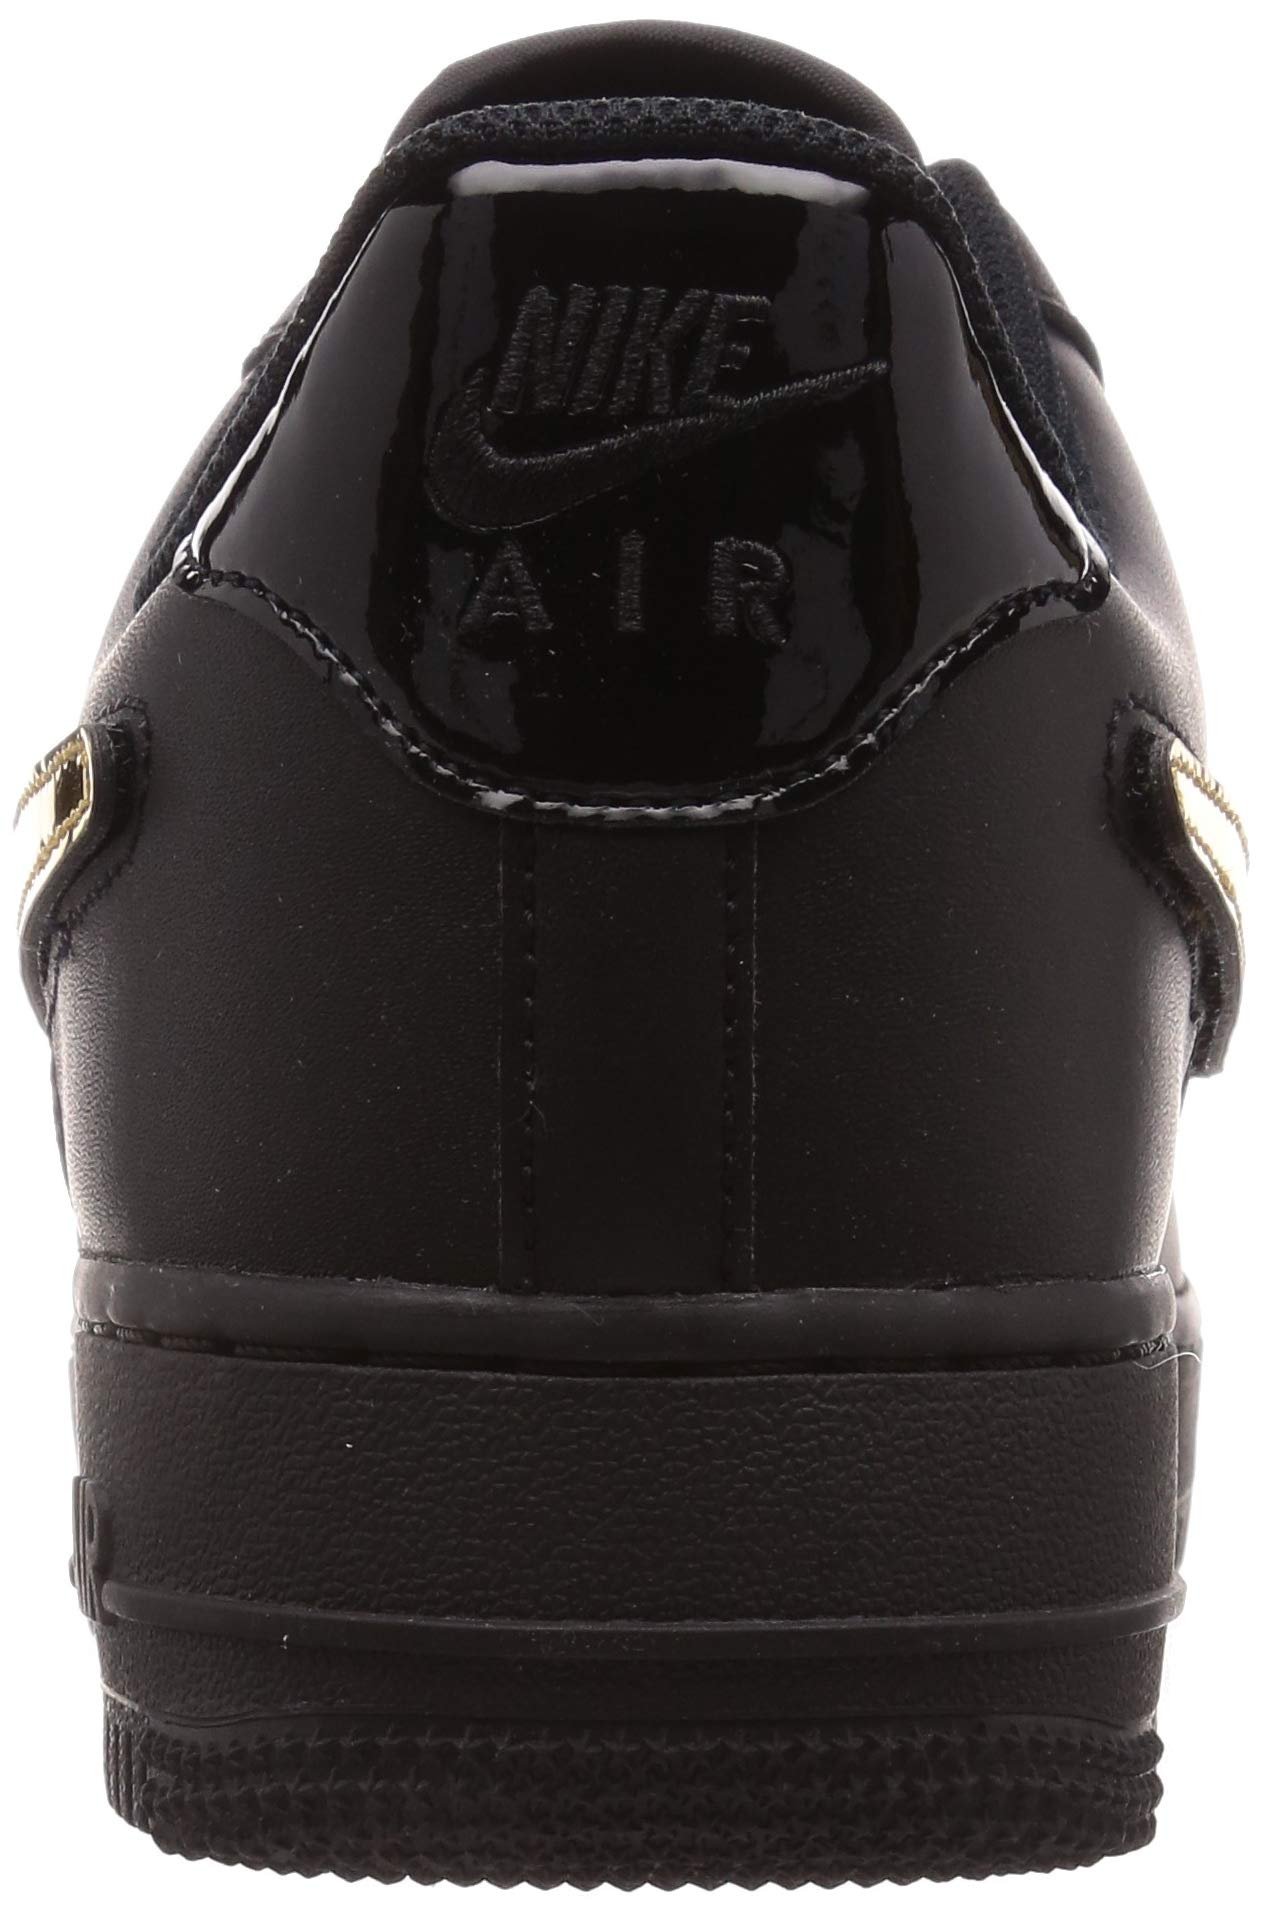 Nike Men's Air Force 1 '07 LV8 3 Removable Swoosh Casual Shoes (12) - image 5 of 6